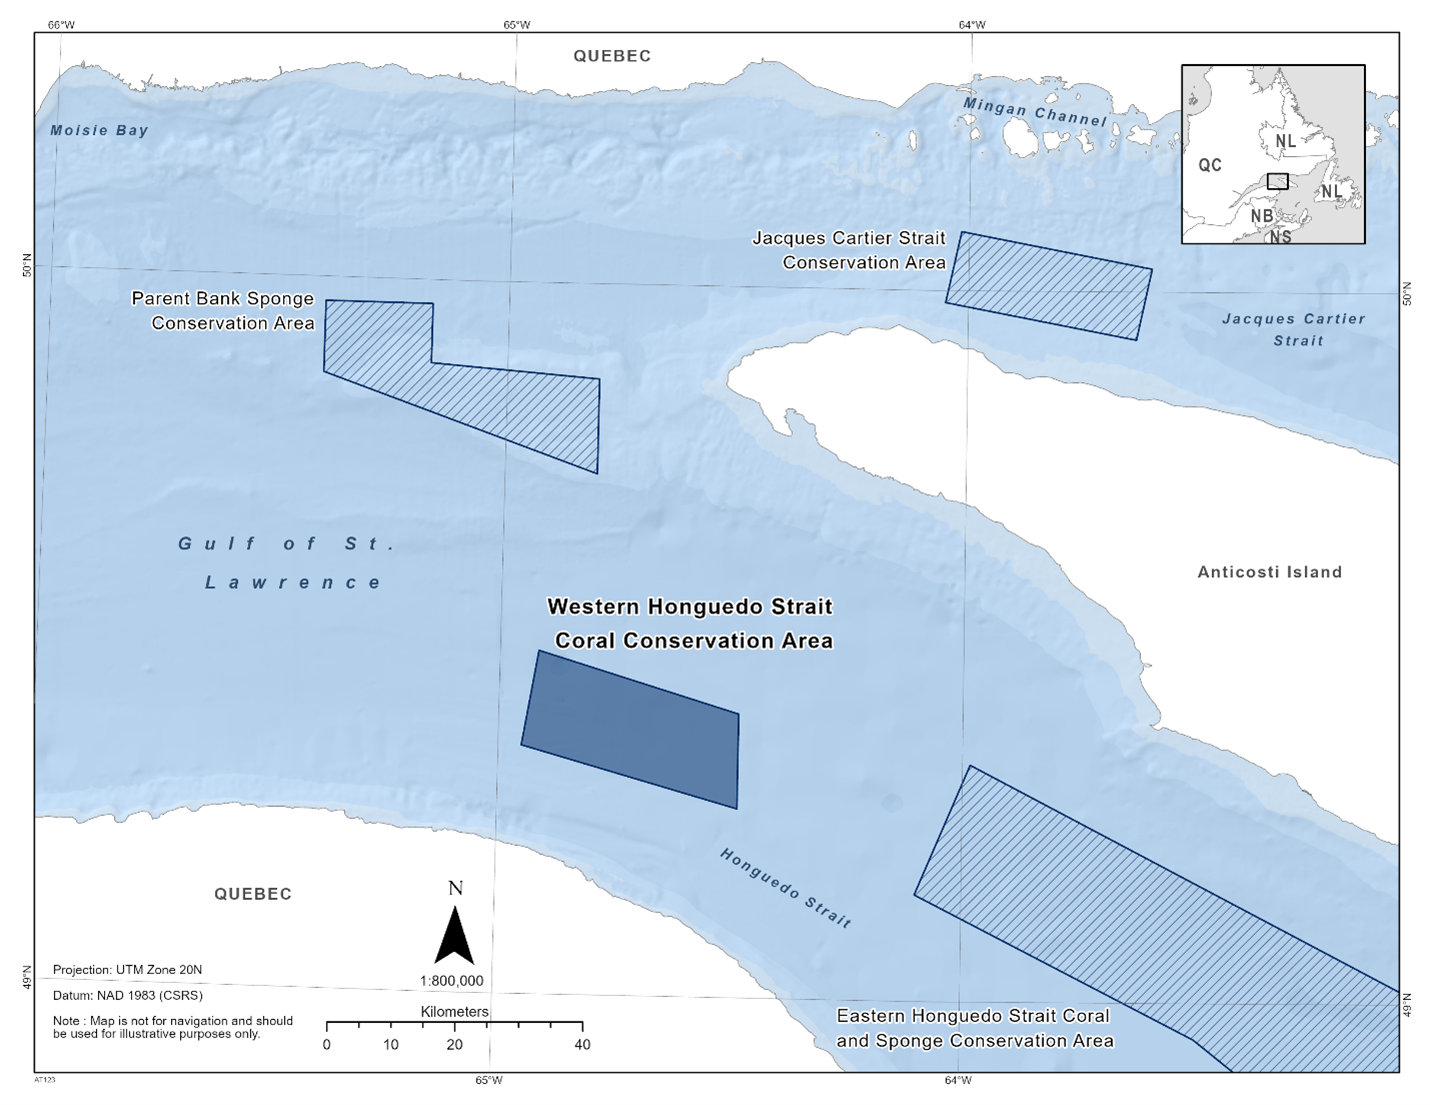 Map of the Western Honguedo Strait Coral Conservation Area in dark blue. The map also features other marine refuges nearby with dark blue diagonal lines (Jacques Cartier Strait Conservation Area, Parent Bank Sponge Conservation Area, Eastern Honguedo Strait Coral and Sponge Conservation Area). 